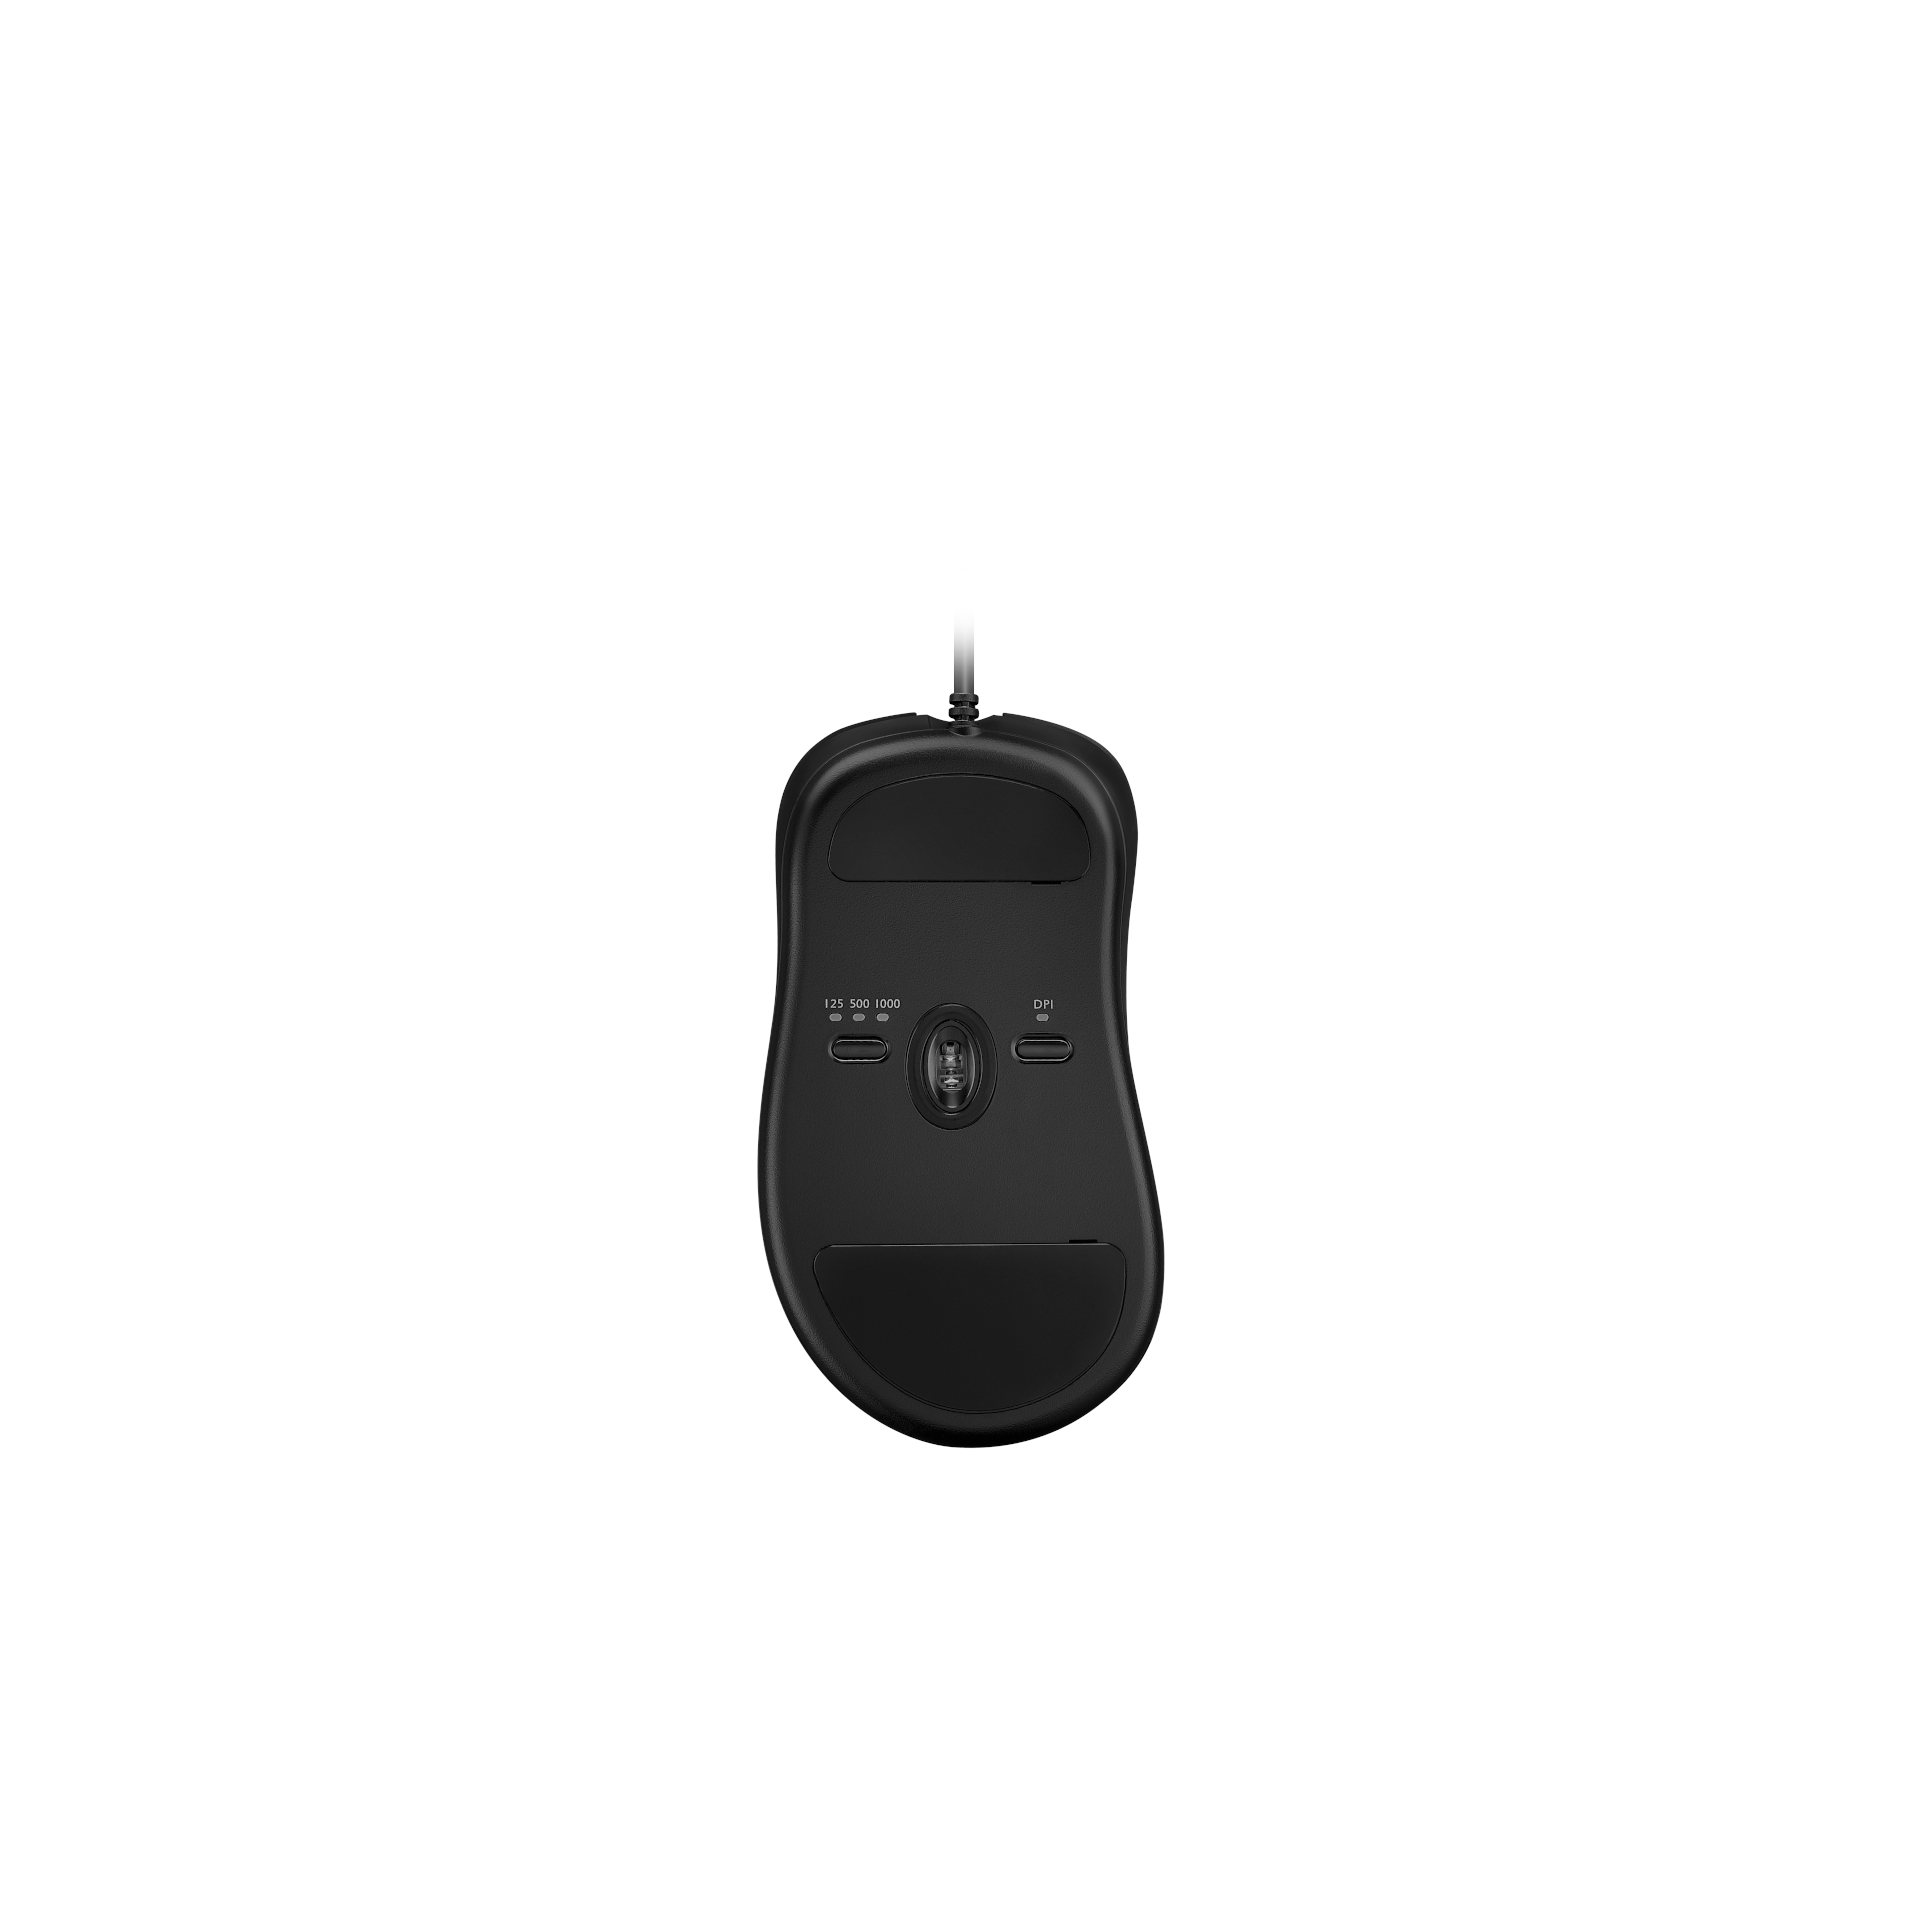 ZOWIE EC1 Mouse For Esports-Addice Inc